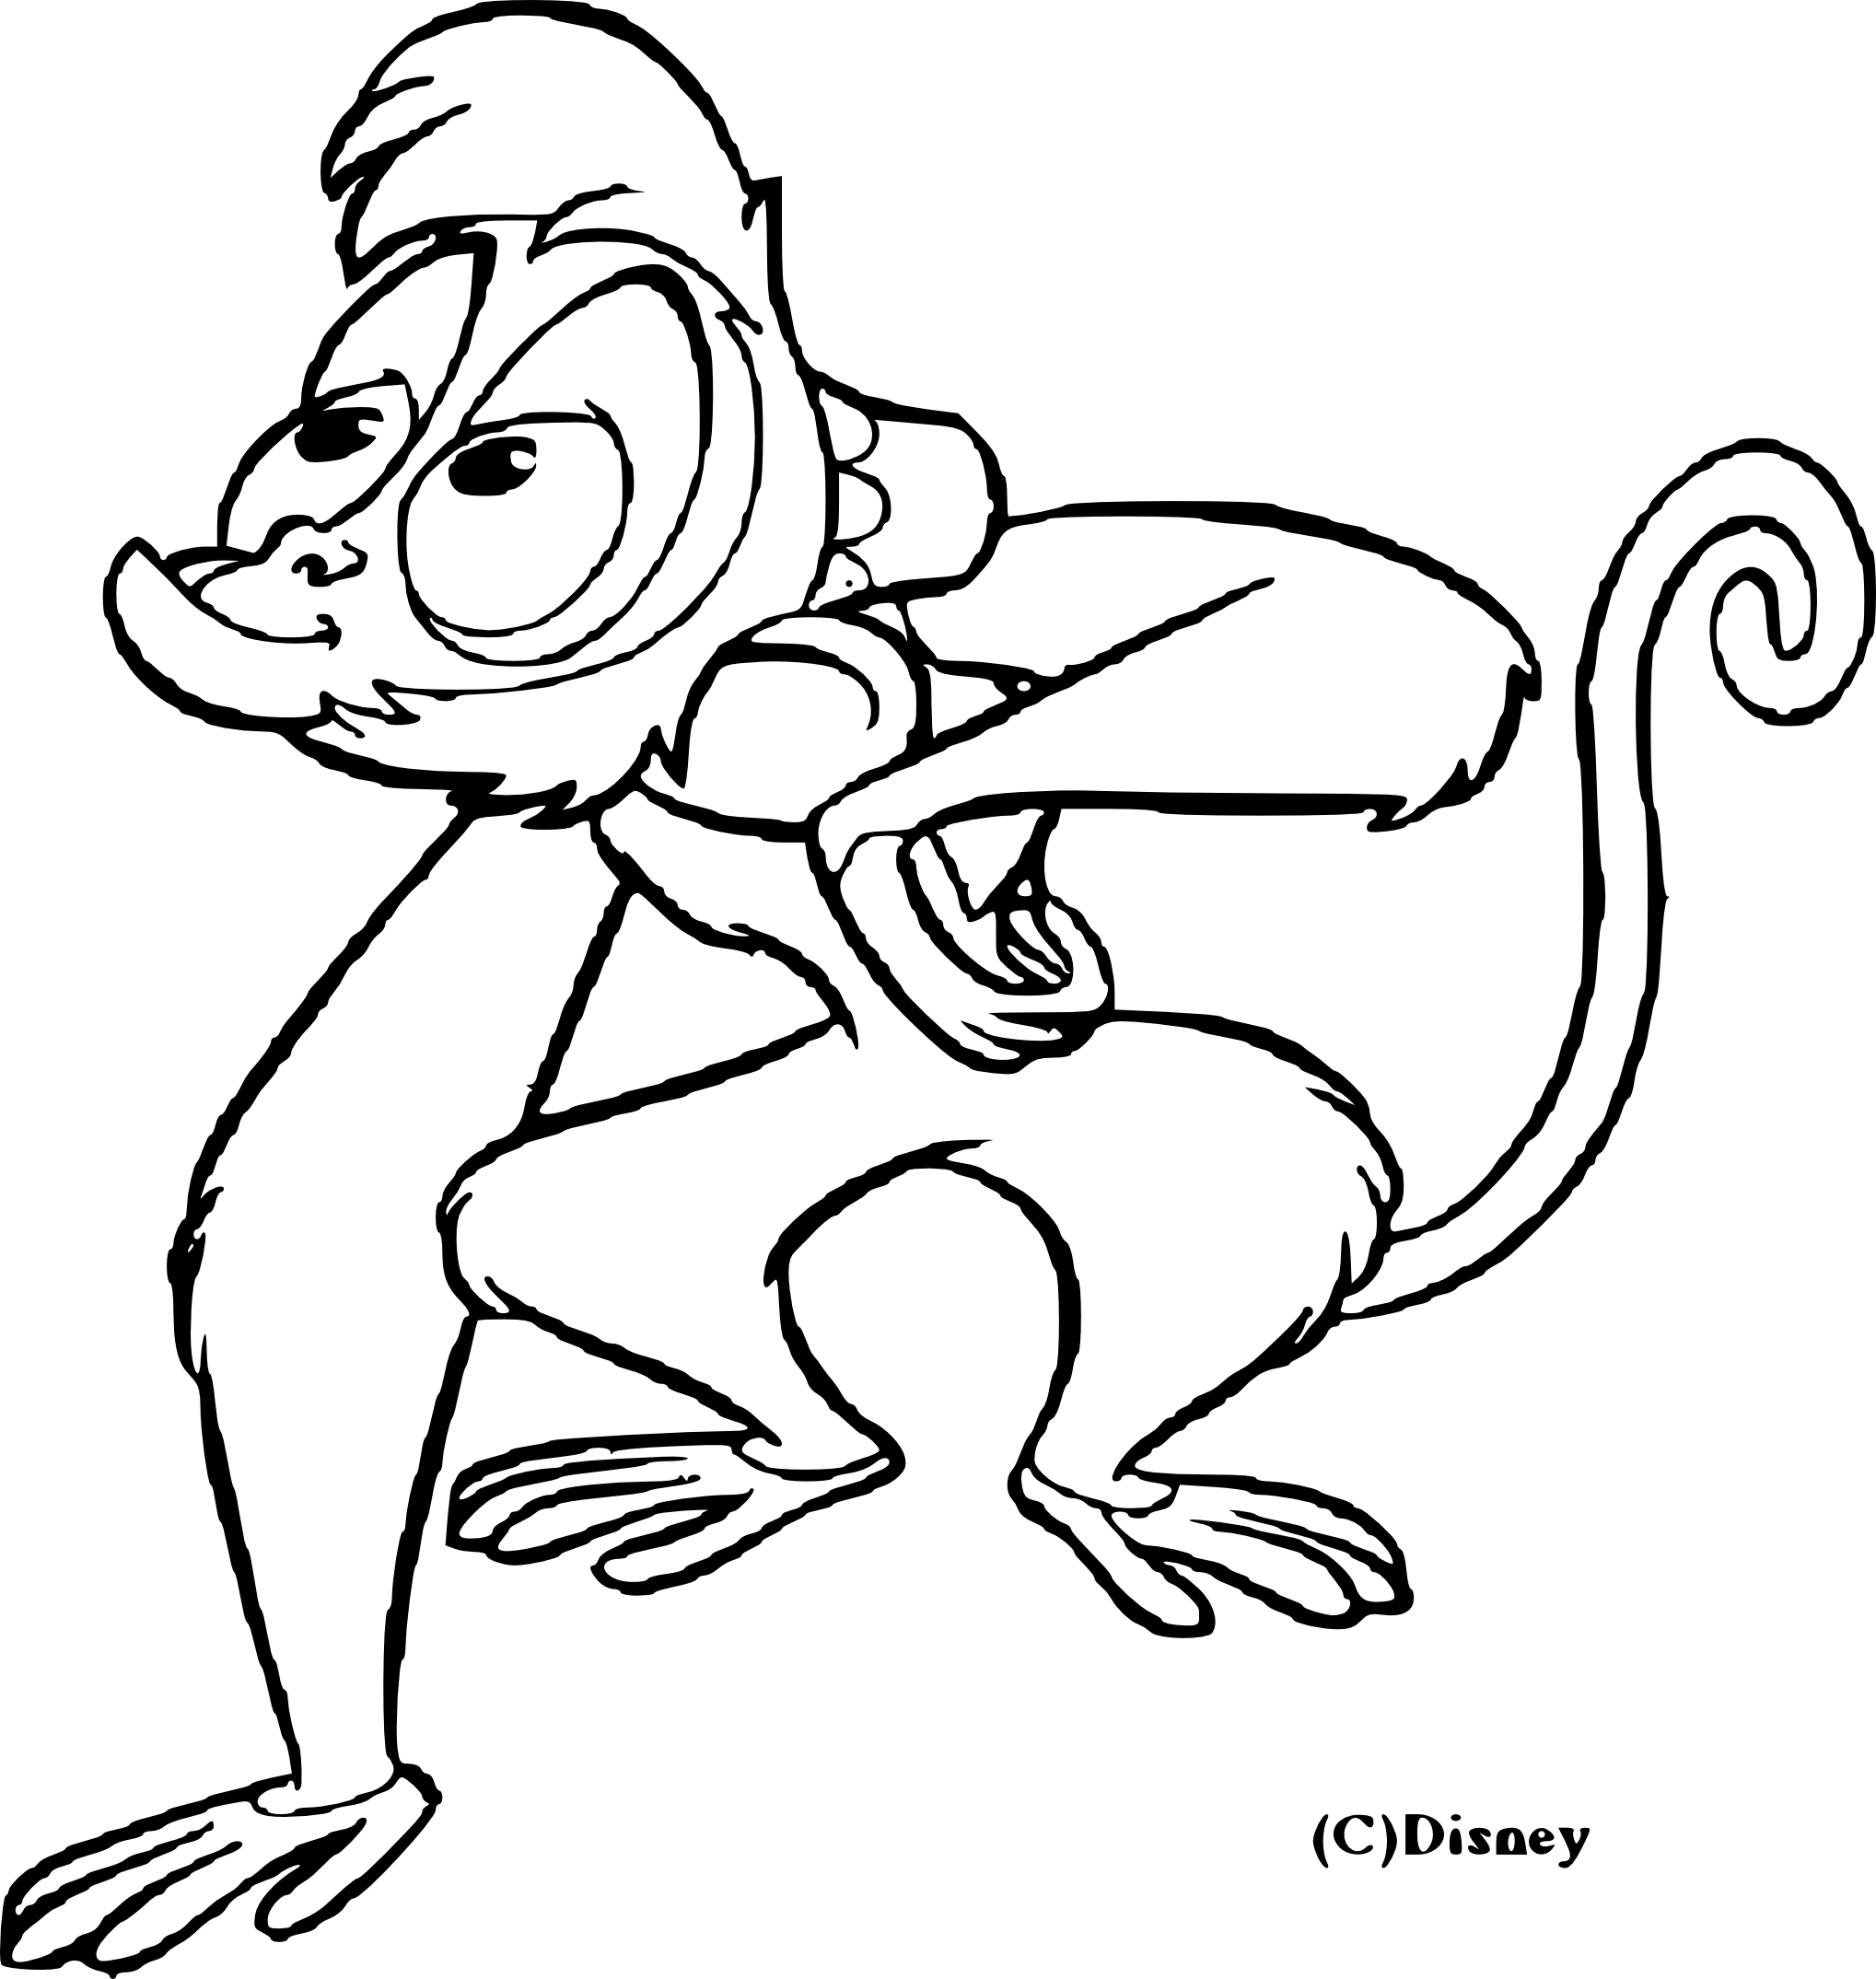 abu from aladdin coloring pages - photo #4